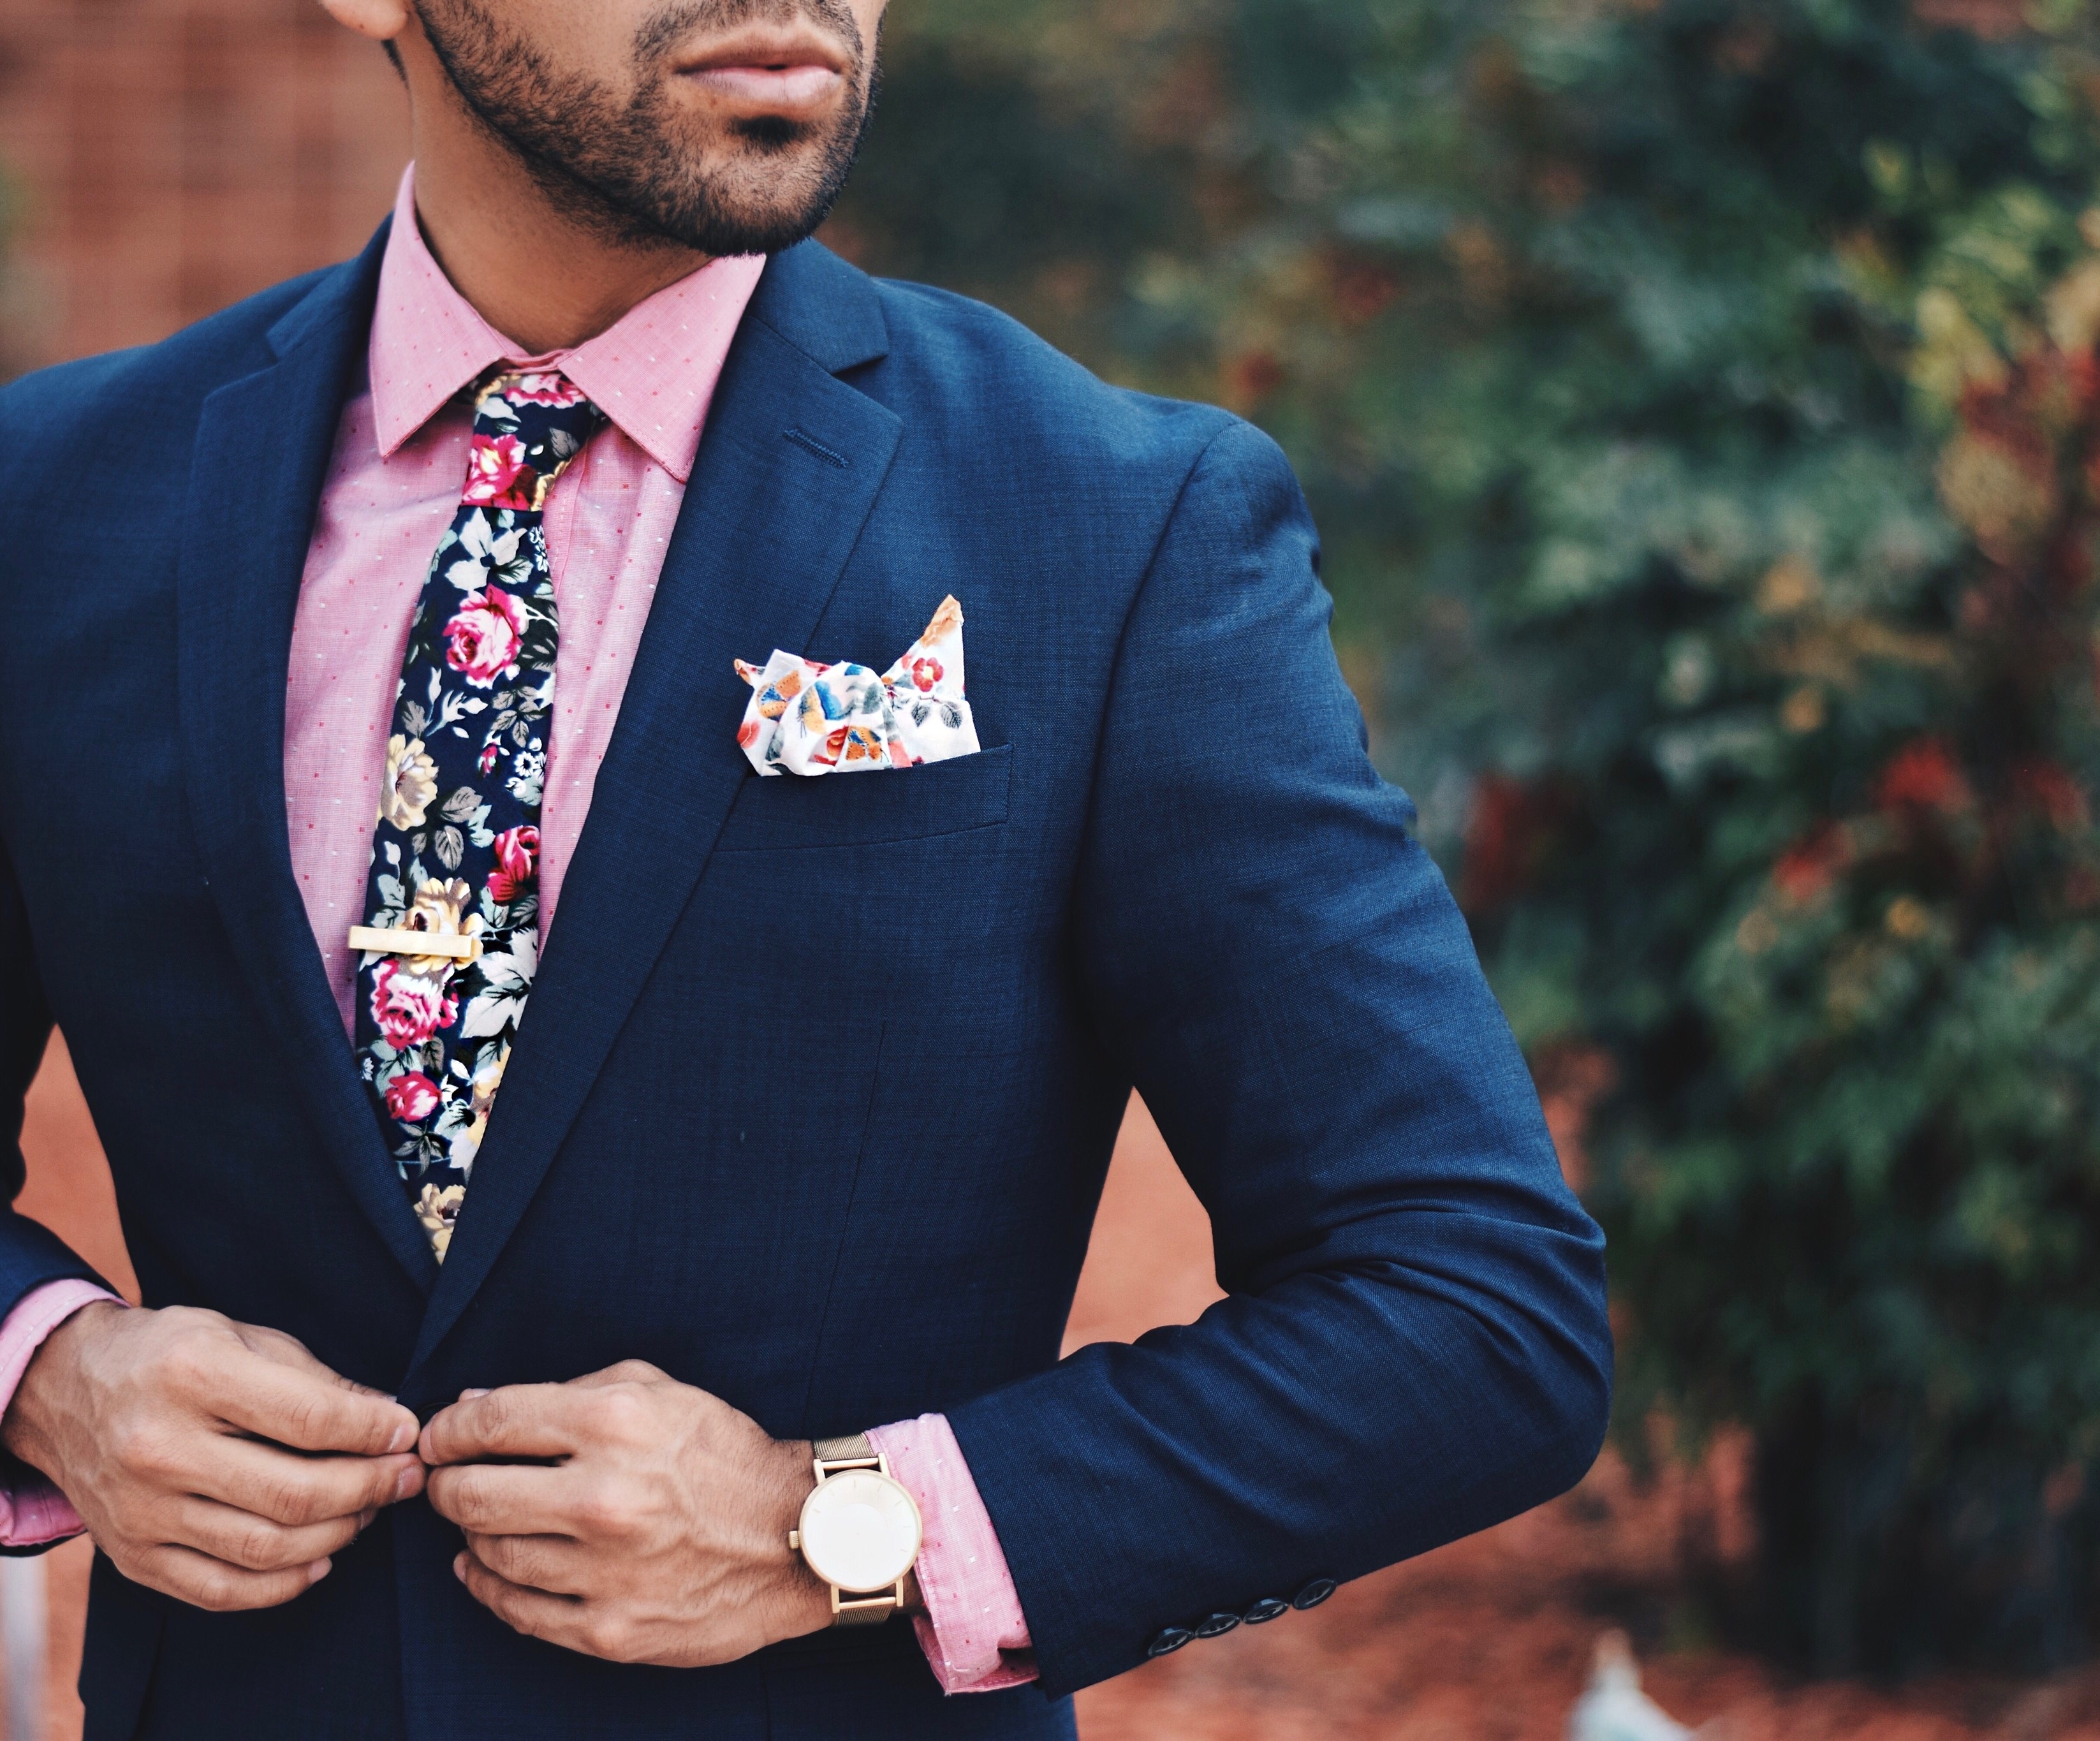 Floral Shirt Outfit for Men-25 Ways to Wear Guys Floral Shirts | Floral  shirt outfit, Shirt outfit, Floral shirt dress